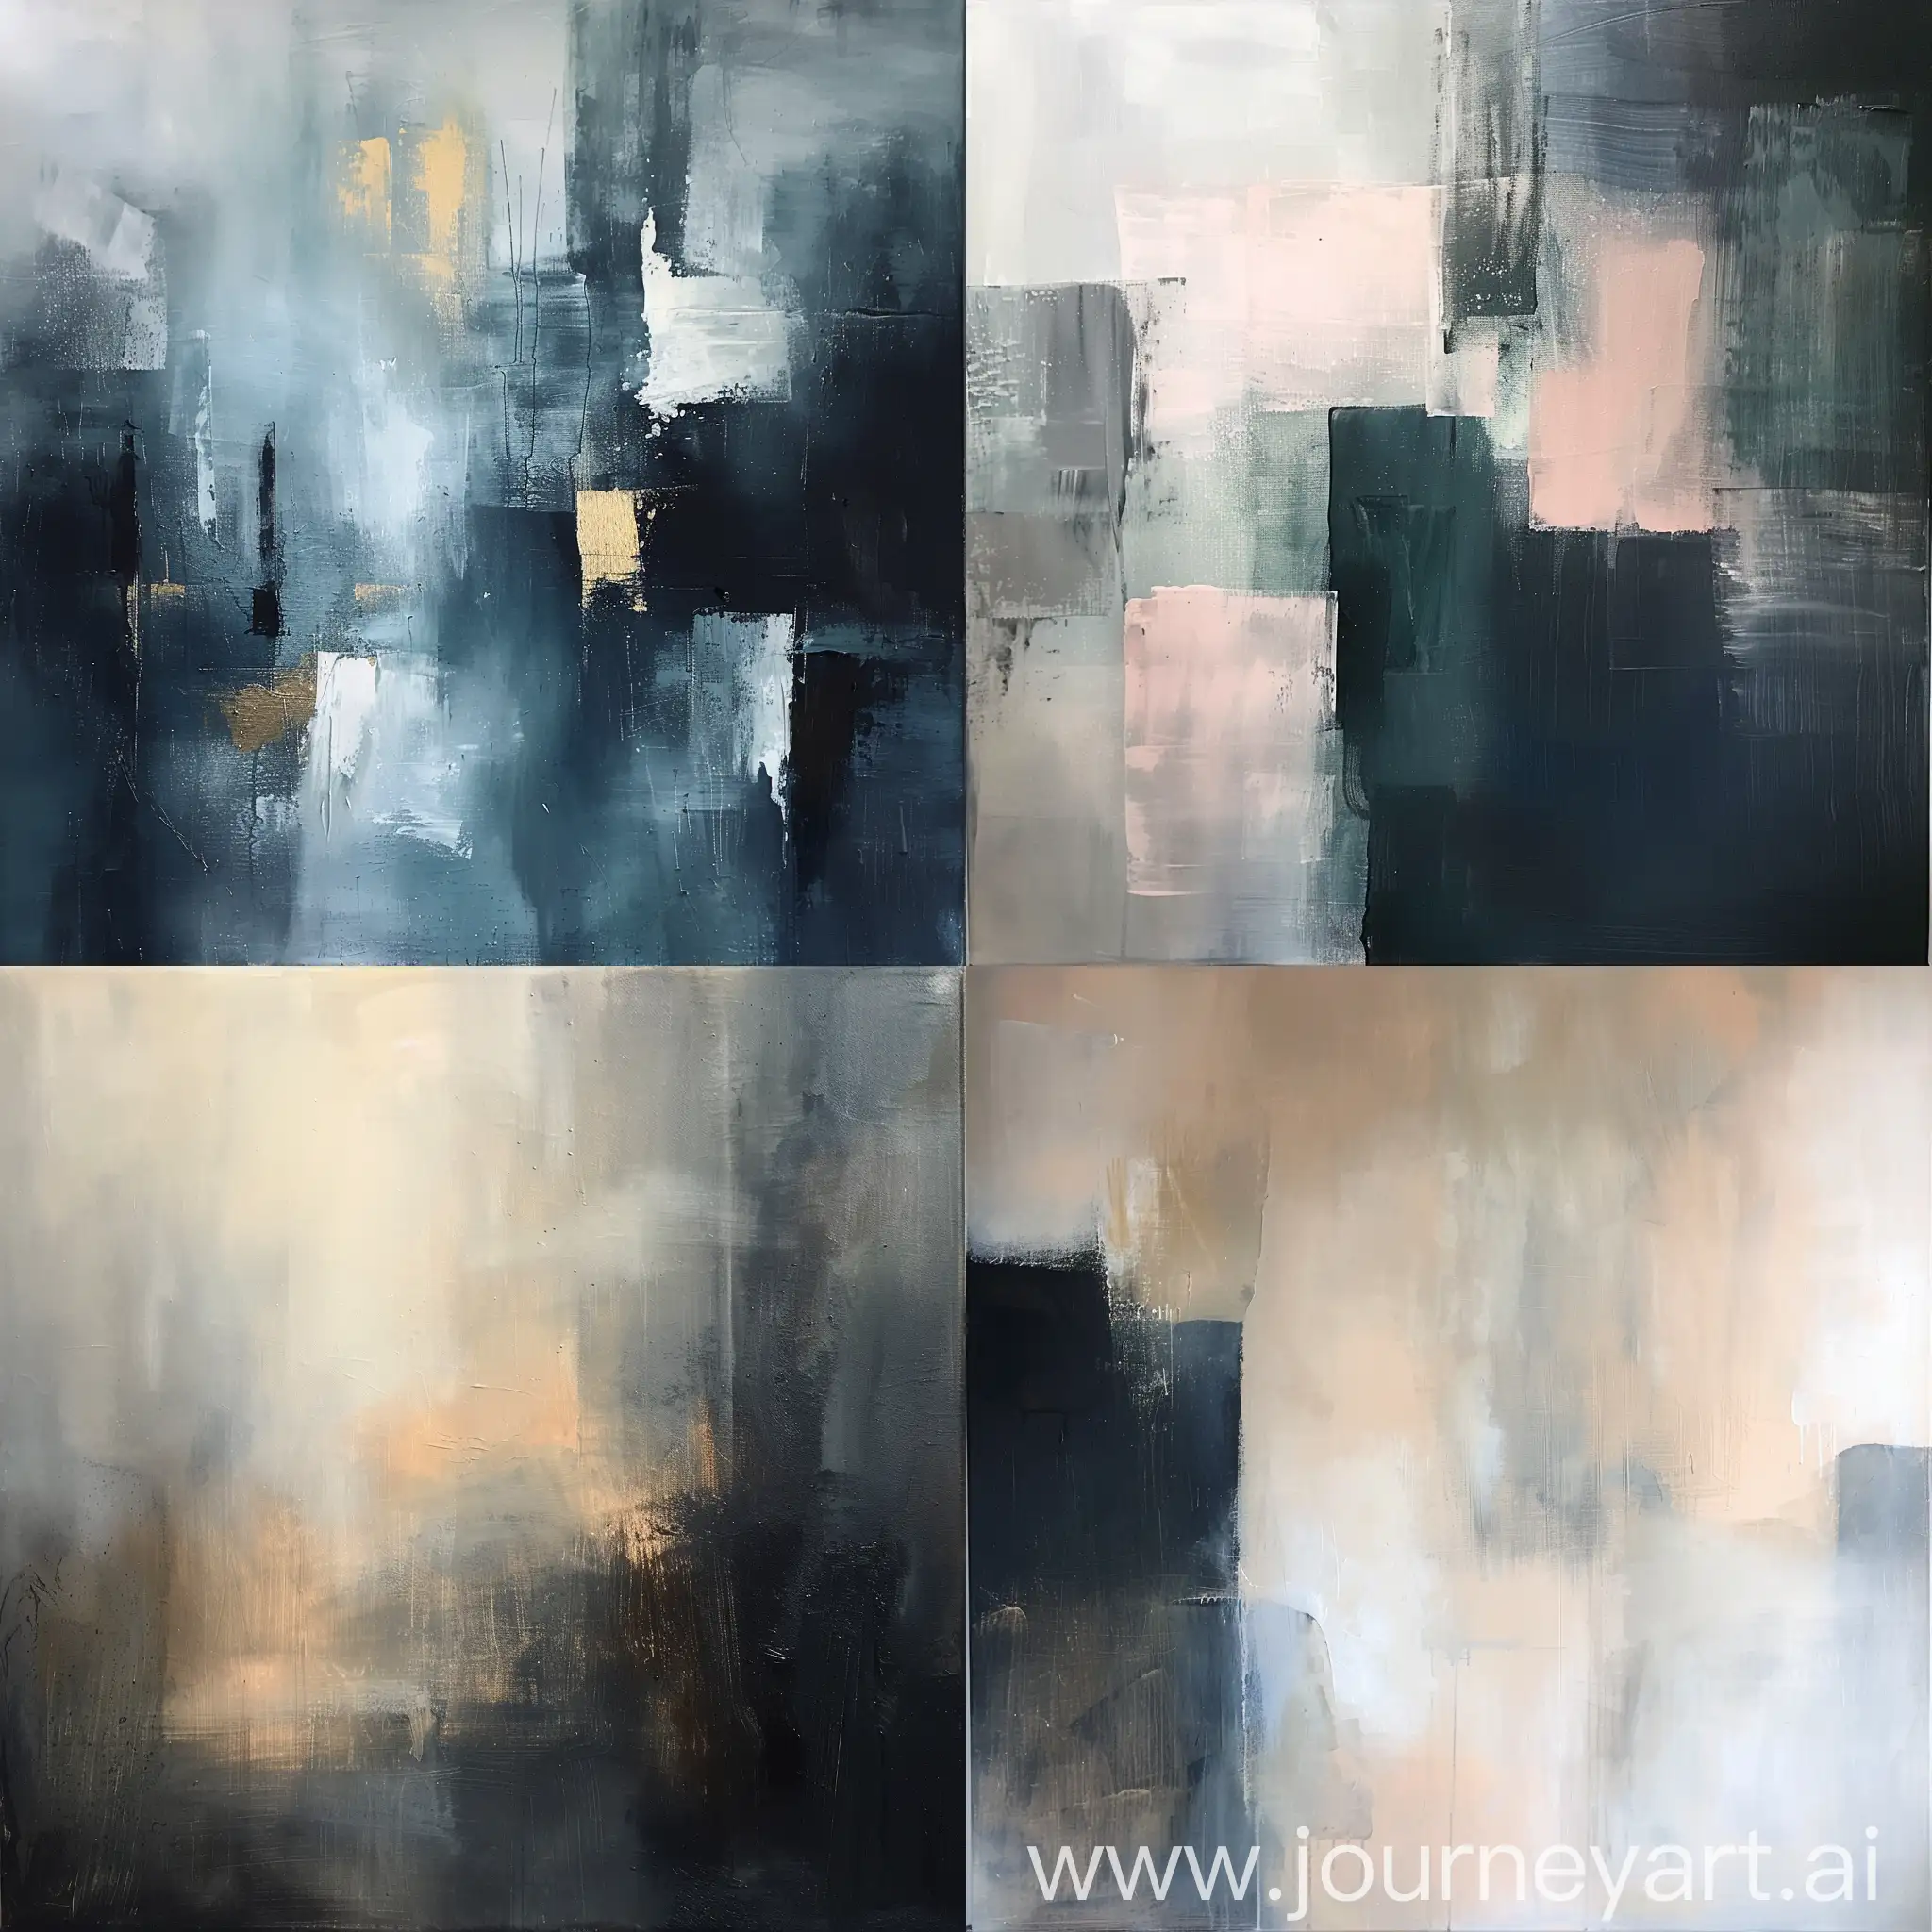 paint an abstract painting with a moody tone and big solid shapes.
